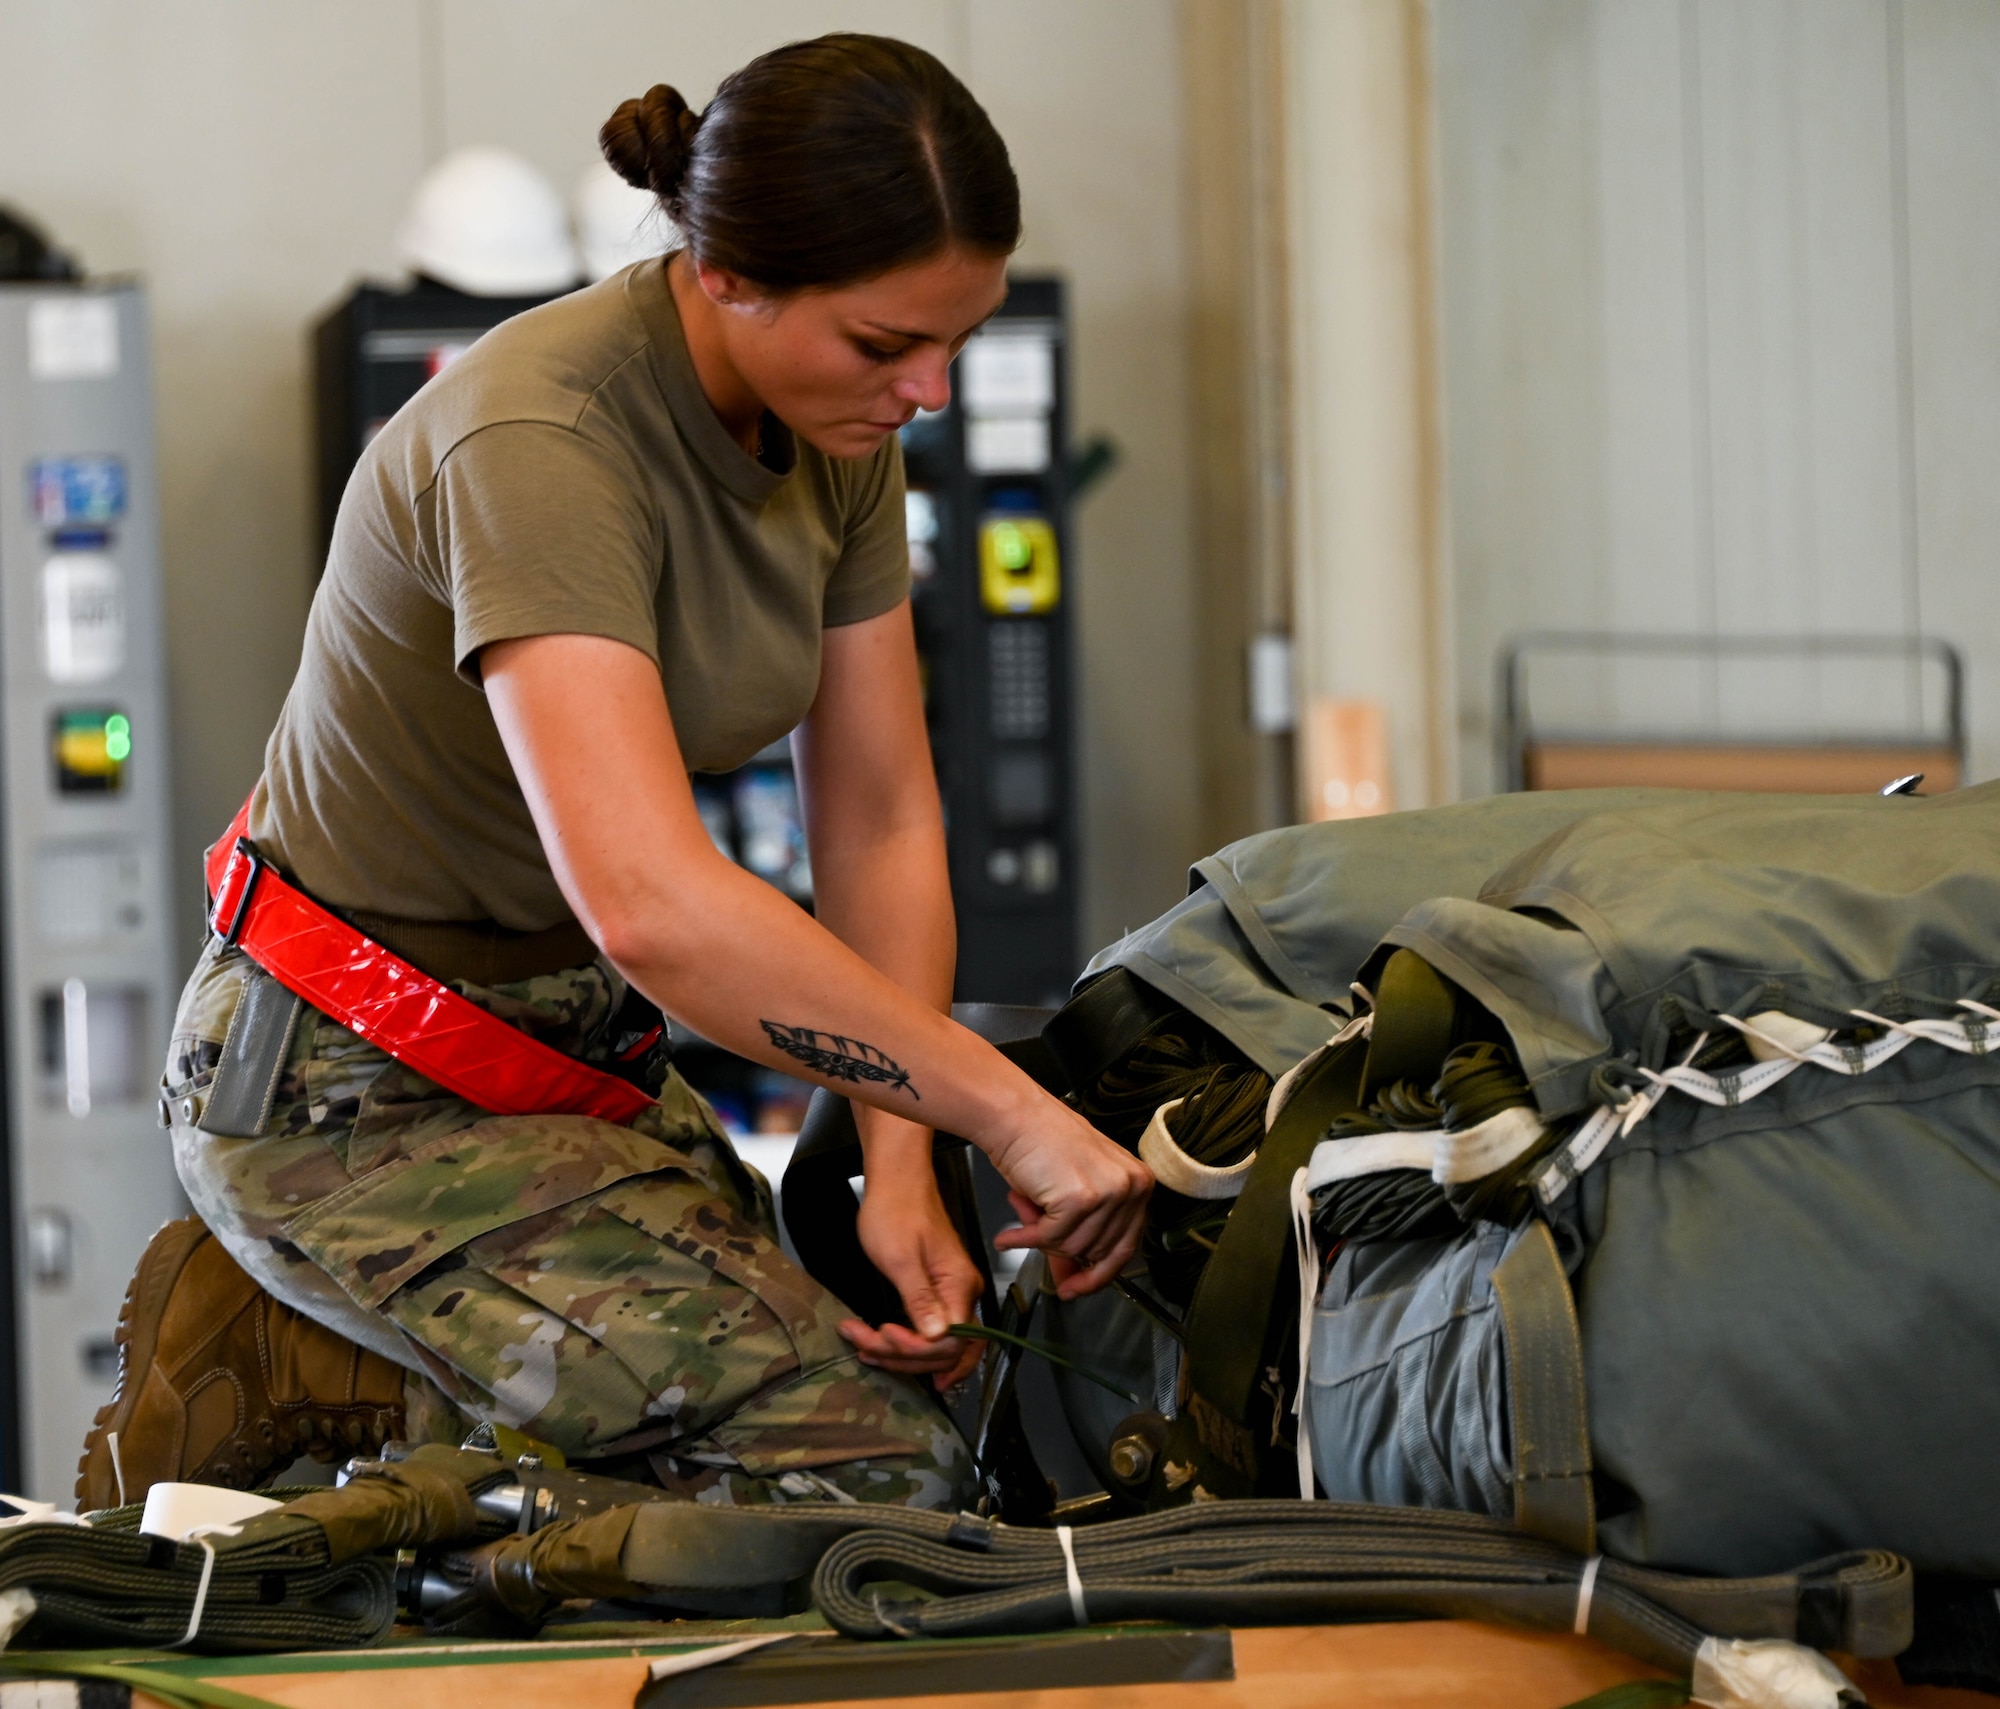 U.S. Air Force Tech. Sgt. Kaycee Clune, 97th Logistics Readiness Squadron unilateral aircrew training rigger supervisor, reconstitutes a dual row airdrop system platform at Altus Air Force Base, Oklahoma, Aug. 15, 2023. “I didn’t realize the impact that I had until one of my Senior Airmen told me that I was her first female noncommissioned officer and thanked me for leading her. That keeps me going, it feels nice not only to know that I made an impact on a young Airman, but other women in my shop know that they have someone they can relate to.” (U.S. Air Force photo by Airman 1st Class Miyah Gray)